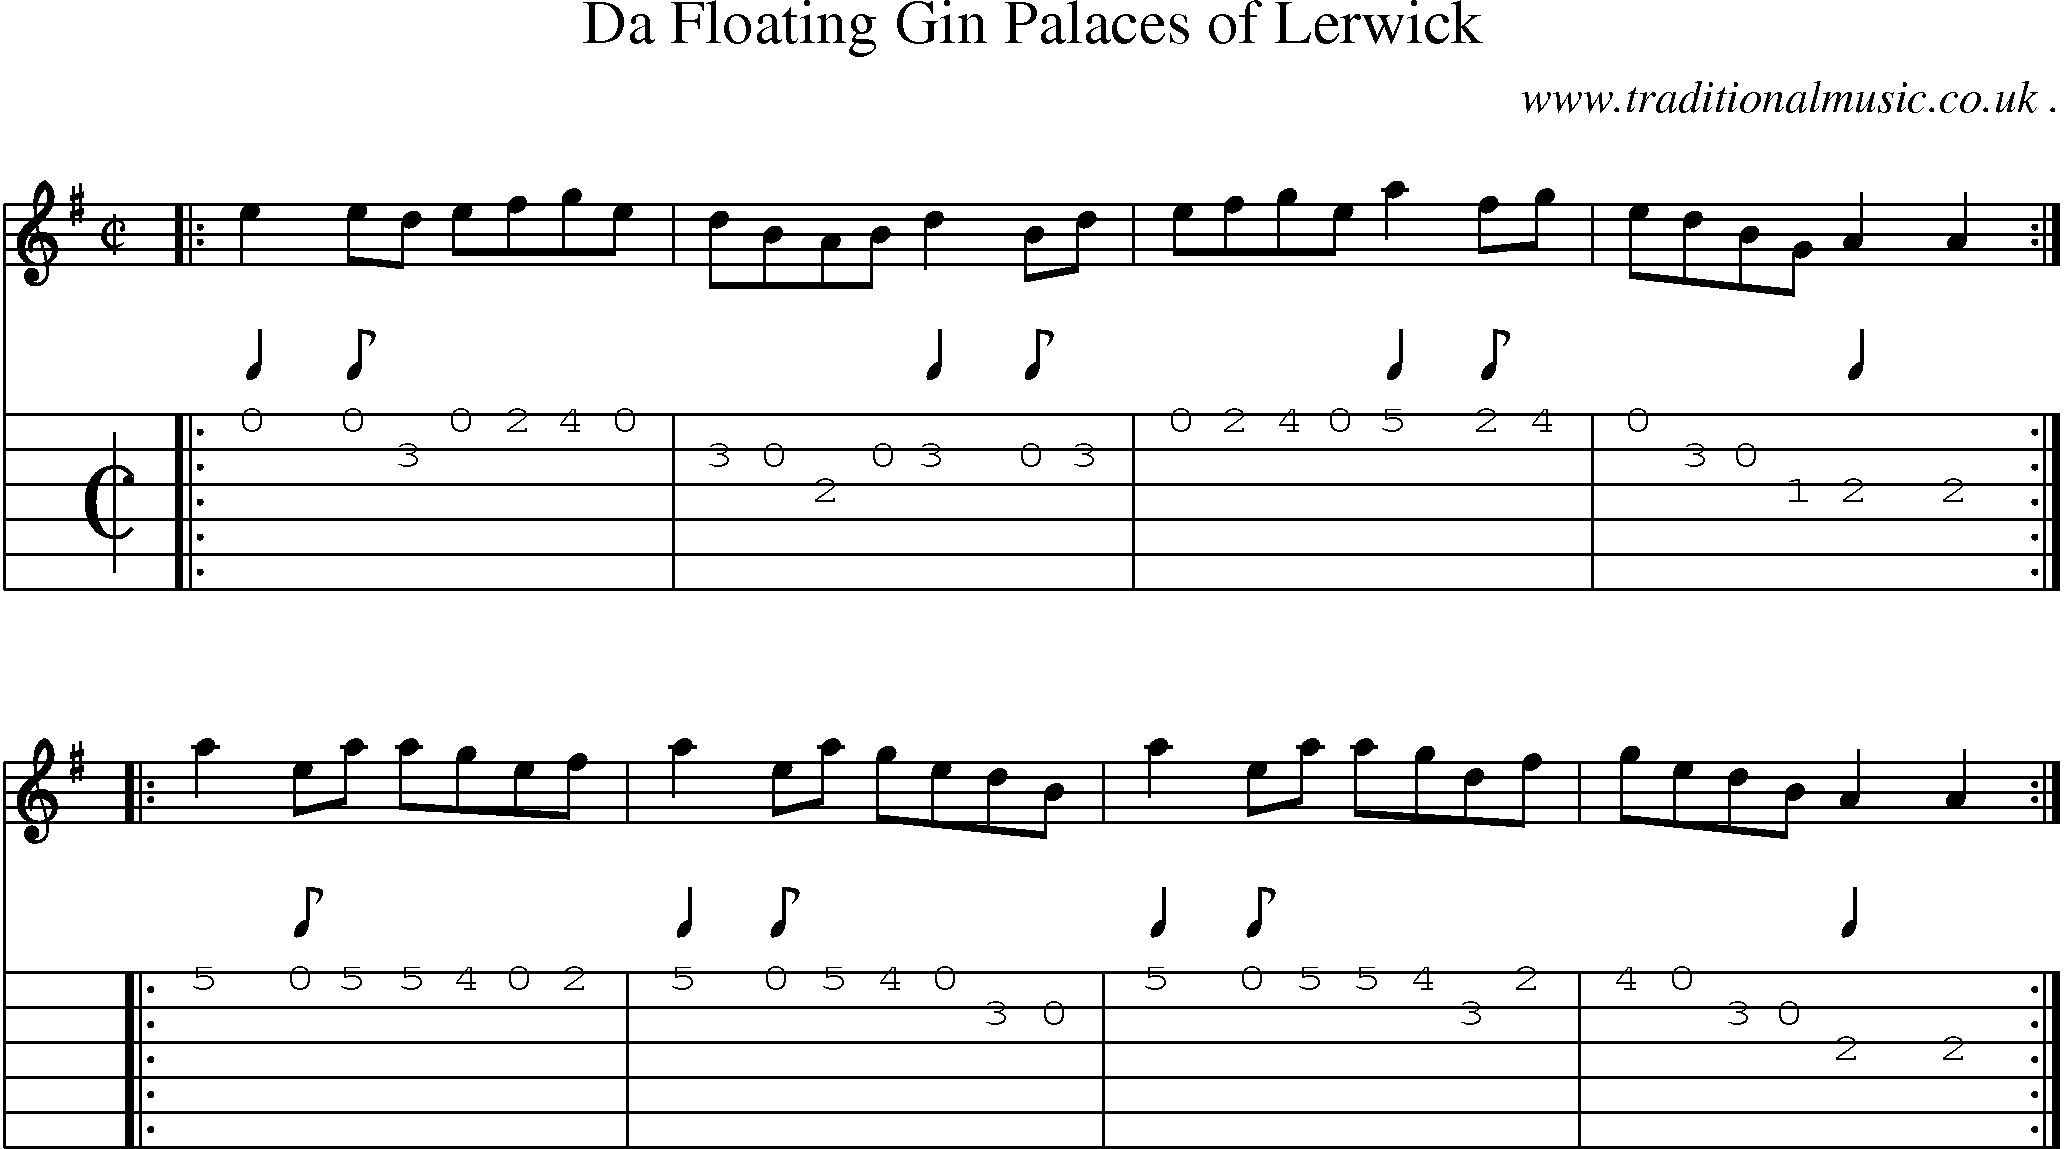 Sheet-music  score, Chords and Guitar Tabs for Da Floating Gin Palaces Of Lerwick